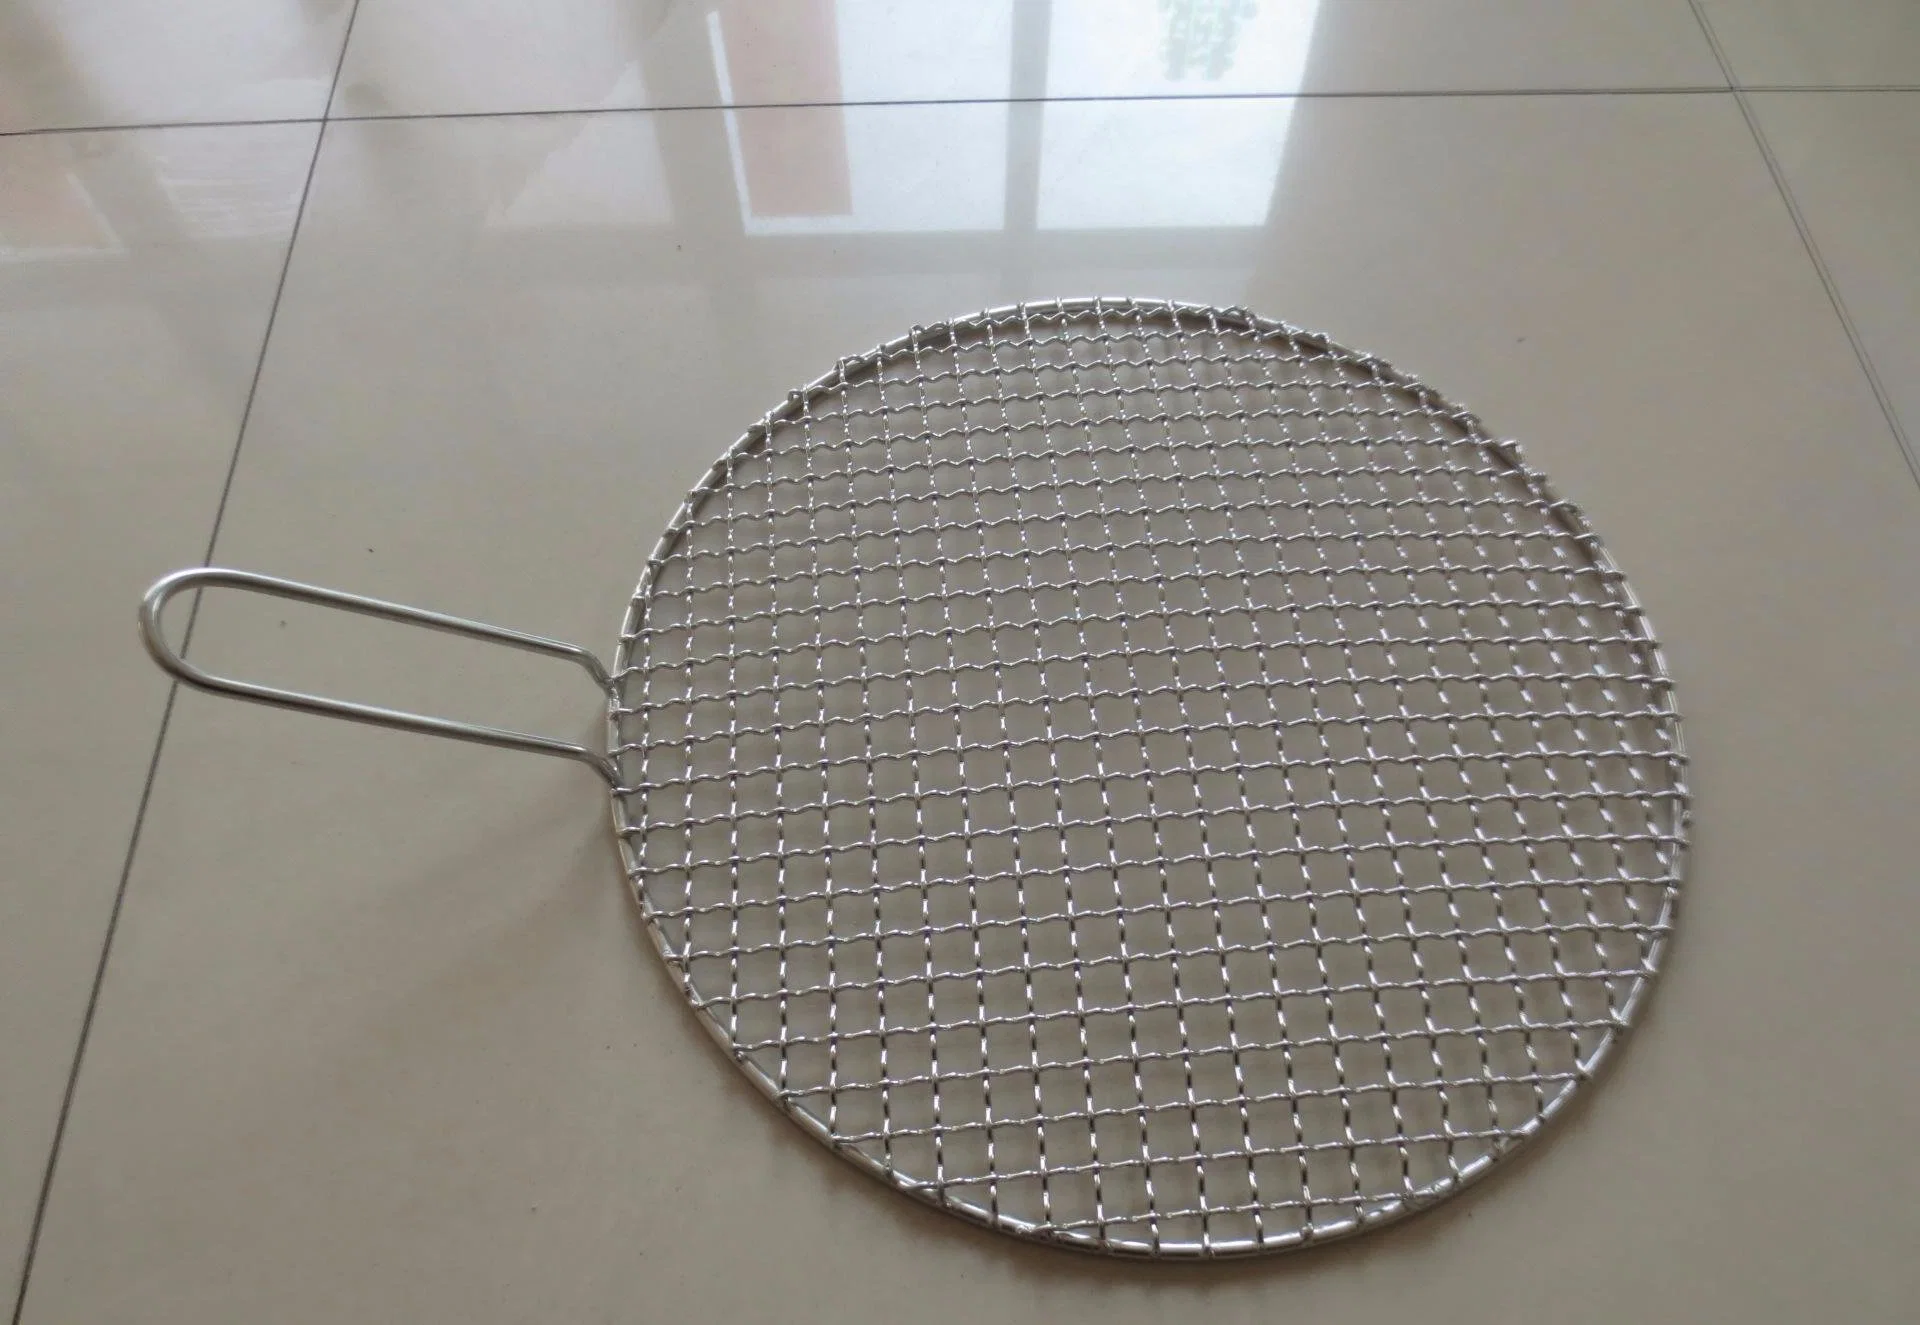 Galvanized Metal BBQ Grill Netting / Stainless Steel BBQ Grill Grates Mesh Netting with Cheap Price